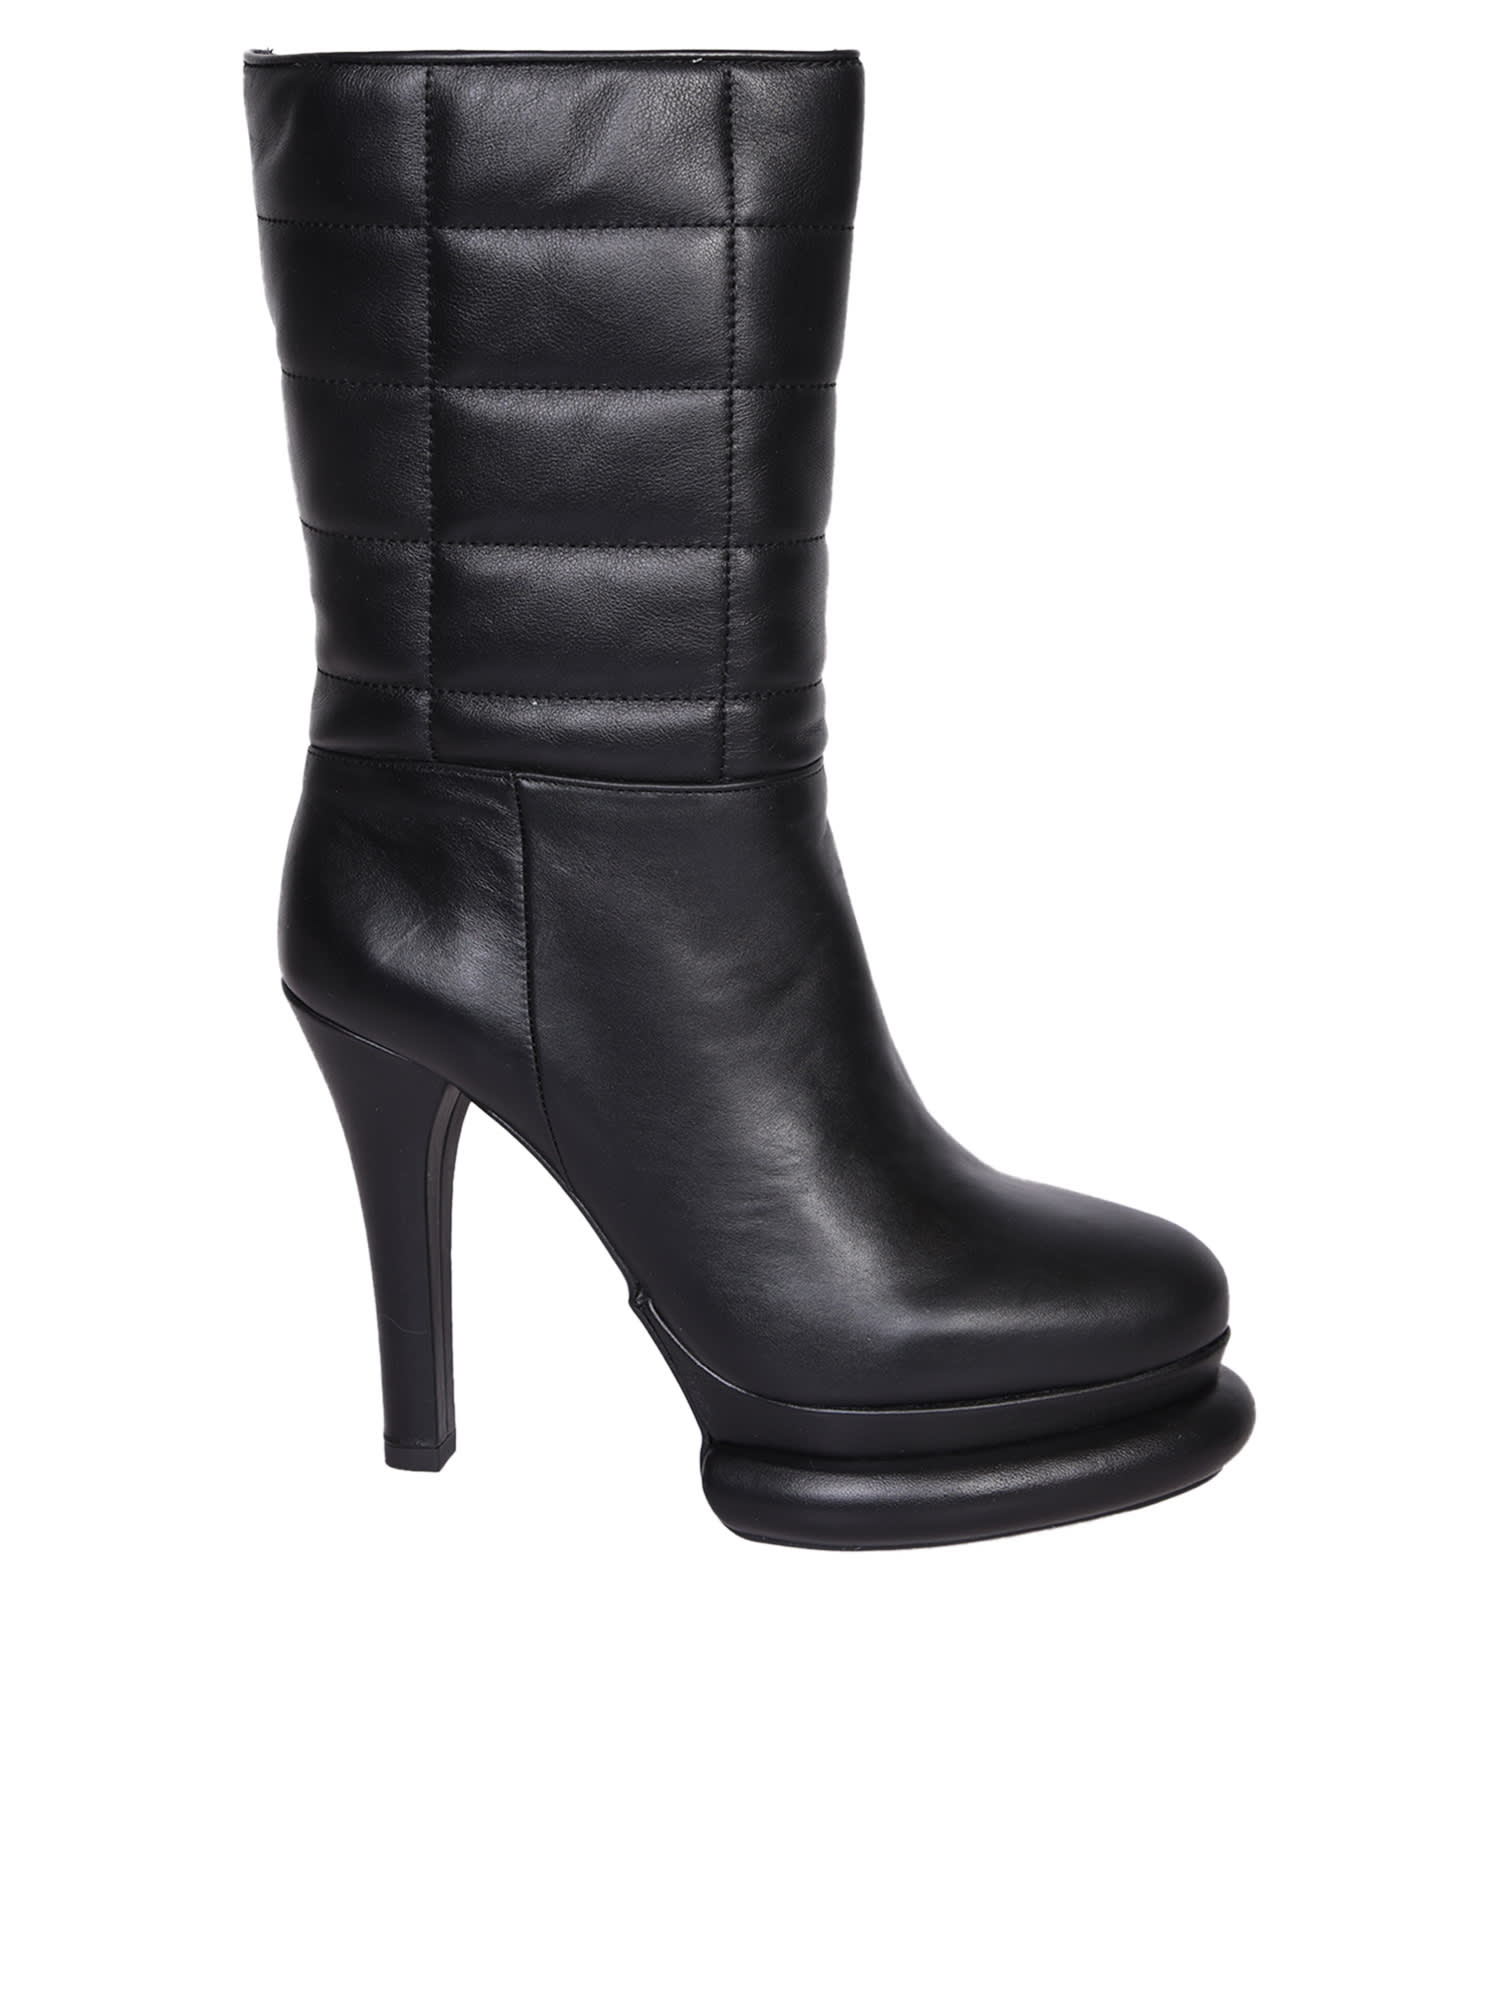 Paloma Barceló Lorian Nero Ankle Boot